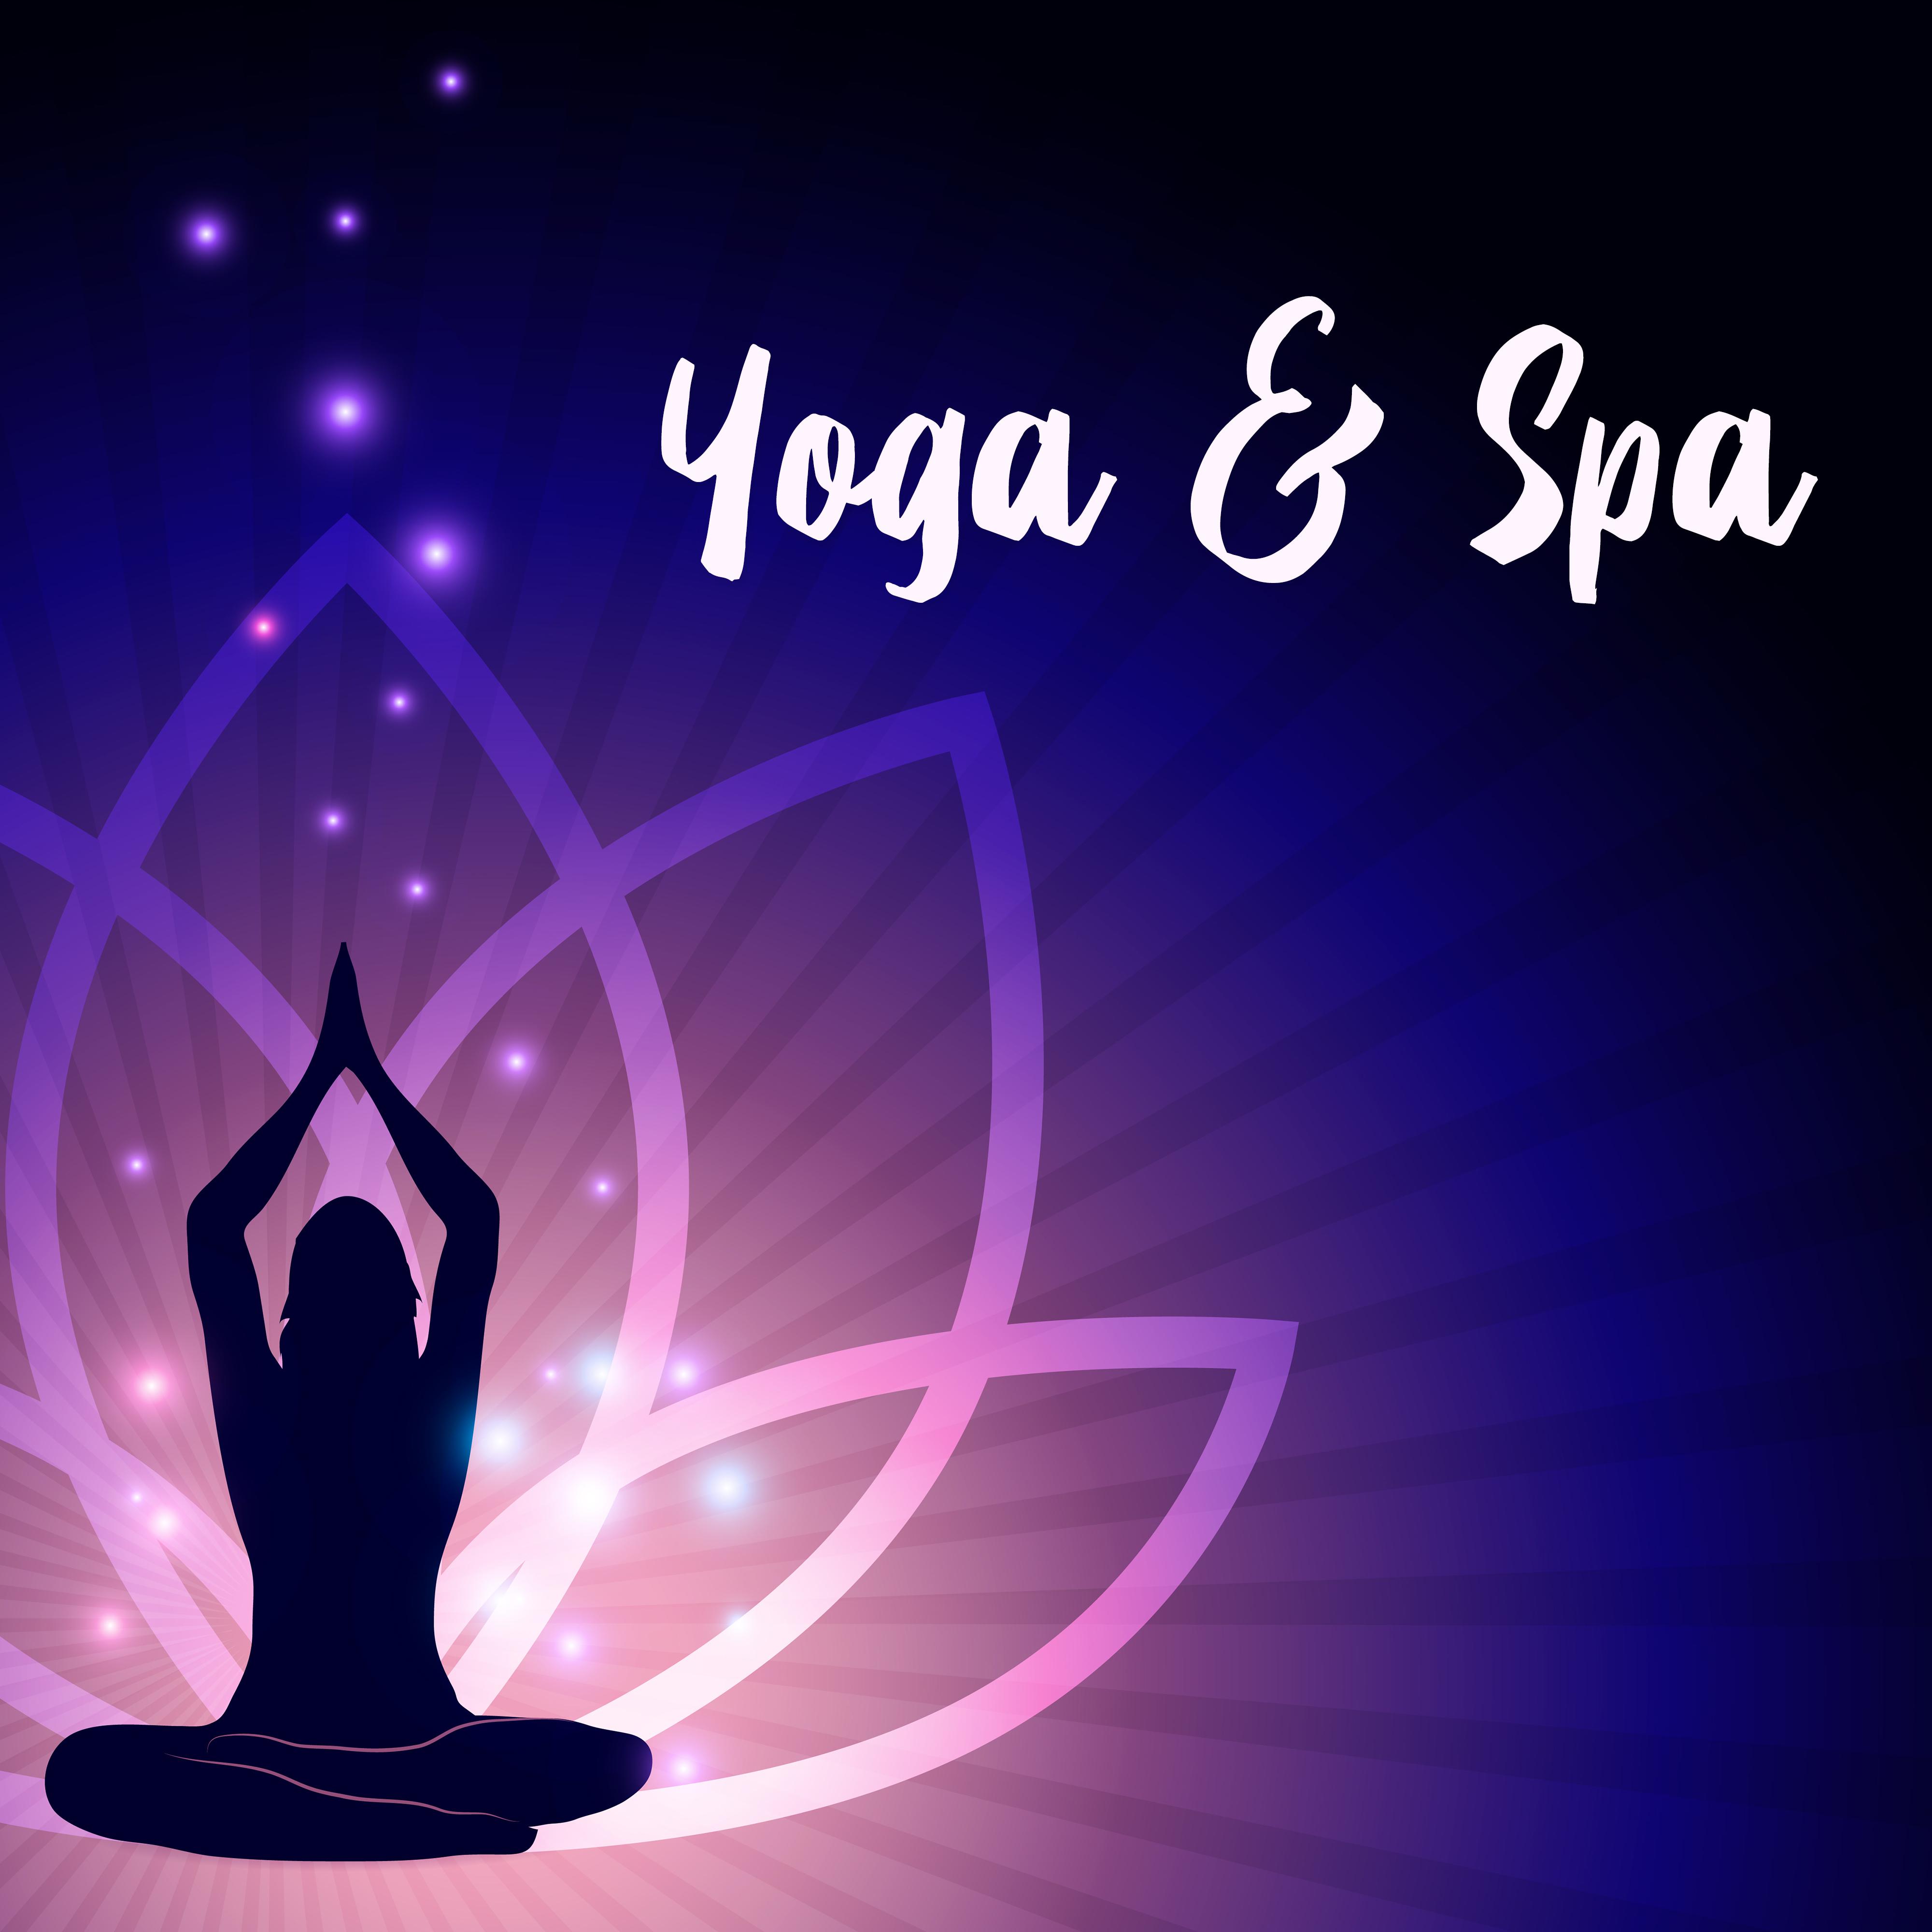 Yoga & Spa – Healing Music for Deep Meditation, Spa, Relax, Sleep, Soothing Massage Music, Mindfulness Relaxation, Deep Zen, Spa Therapy